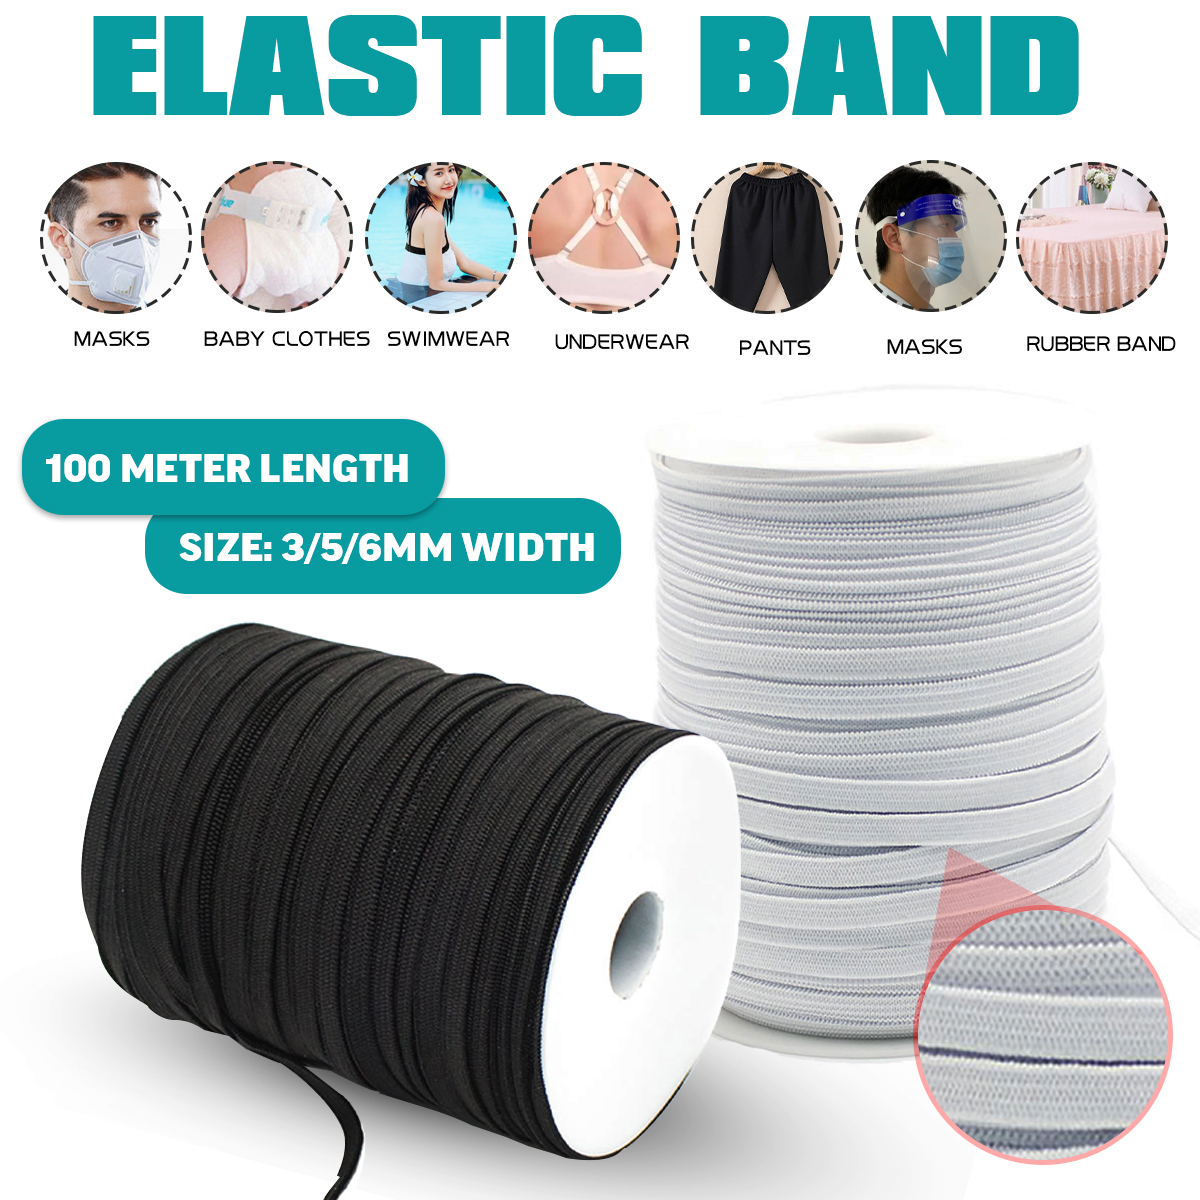 356mm-Elastic-Band-Cord-Knits-100-Meter-Length-Mouth-Hat-Stretch-DIY-Sewing-1701161-1